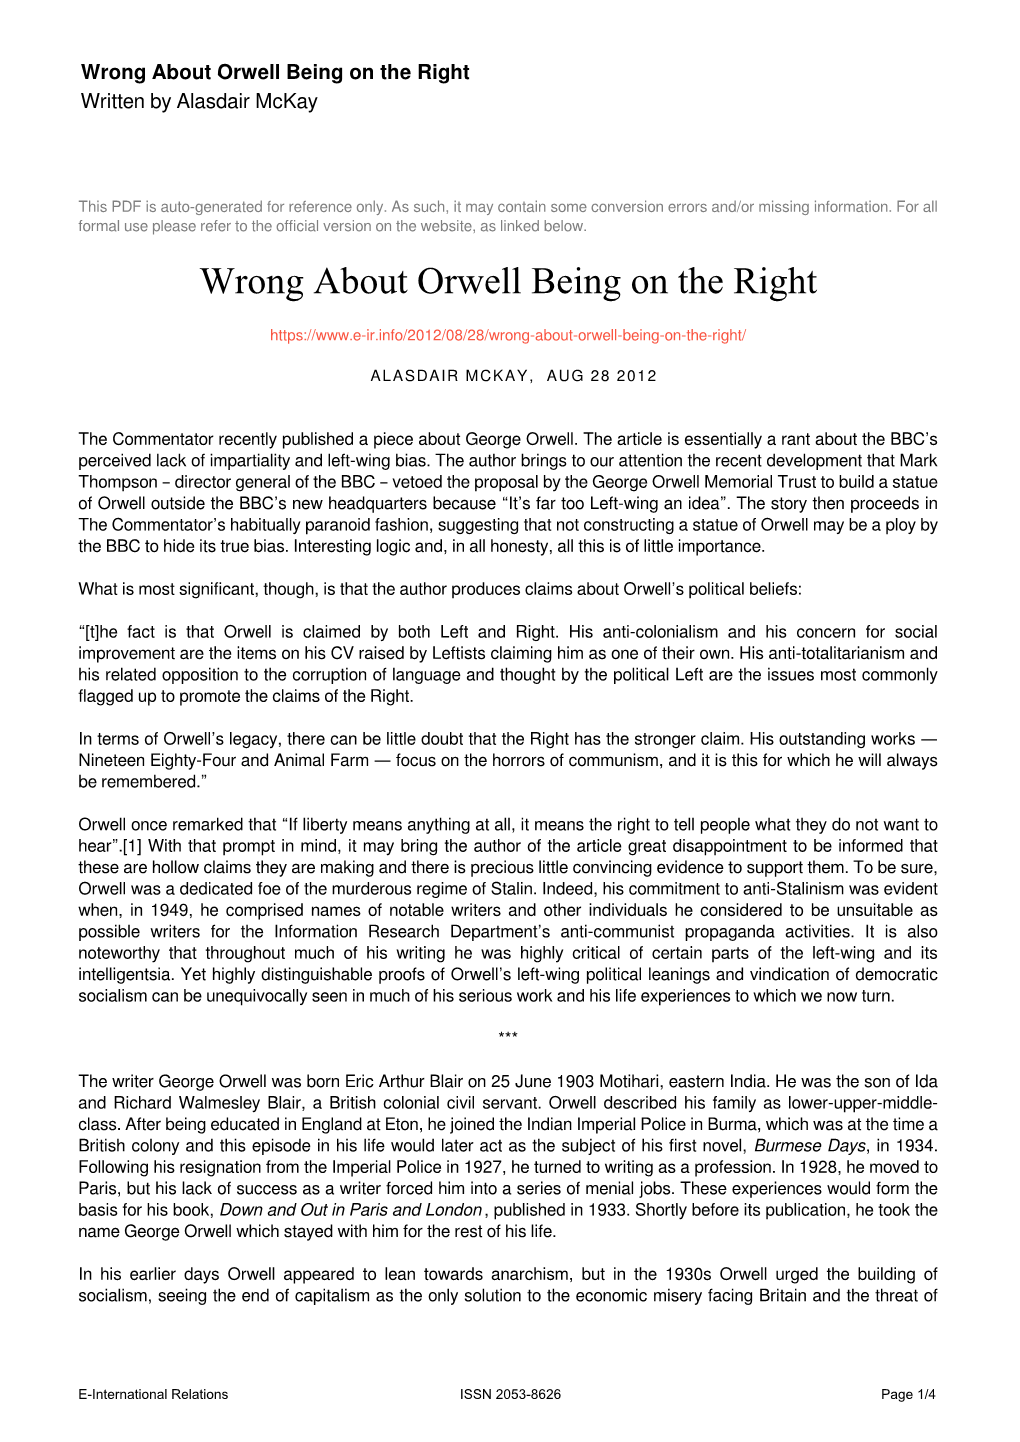 Wrong About Orwell Being on the Right Written by Alasdair Mckay